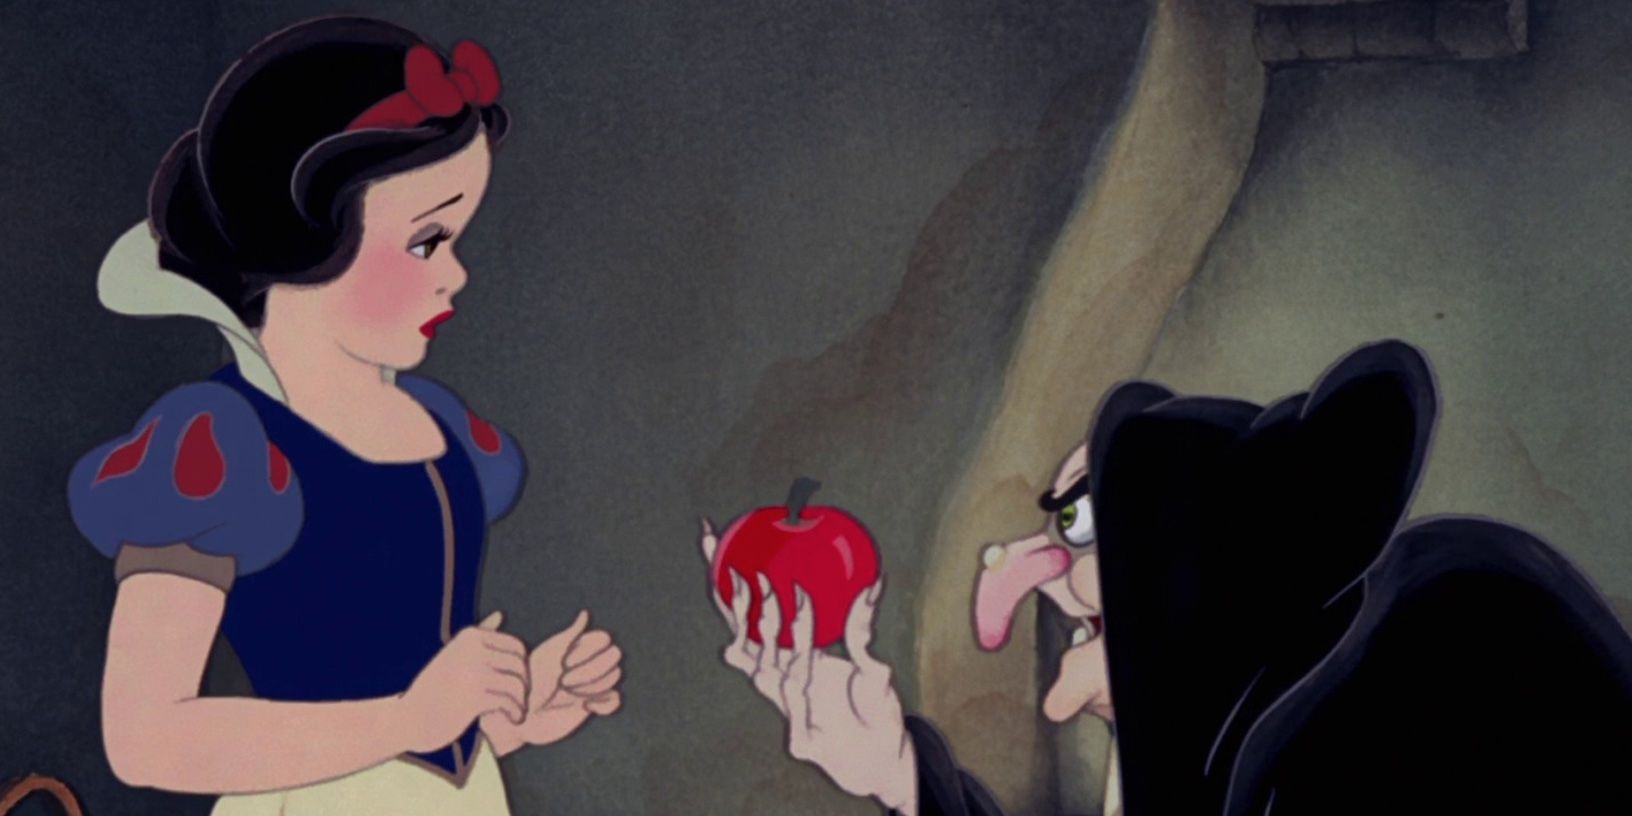 Snow White': Everything We Know so Far About Disney's Live-Action